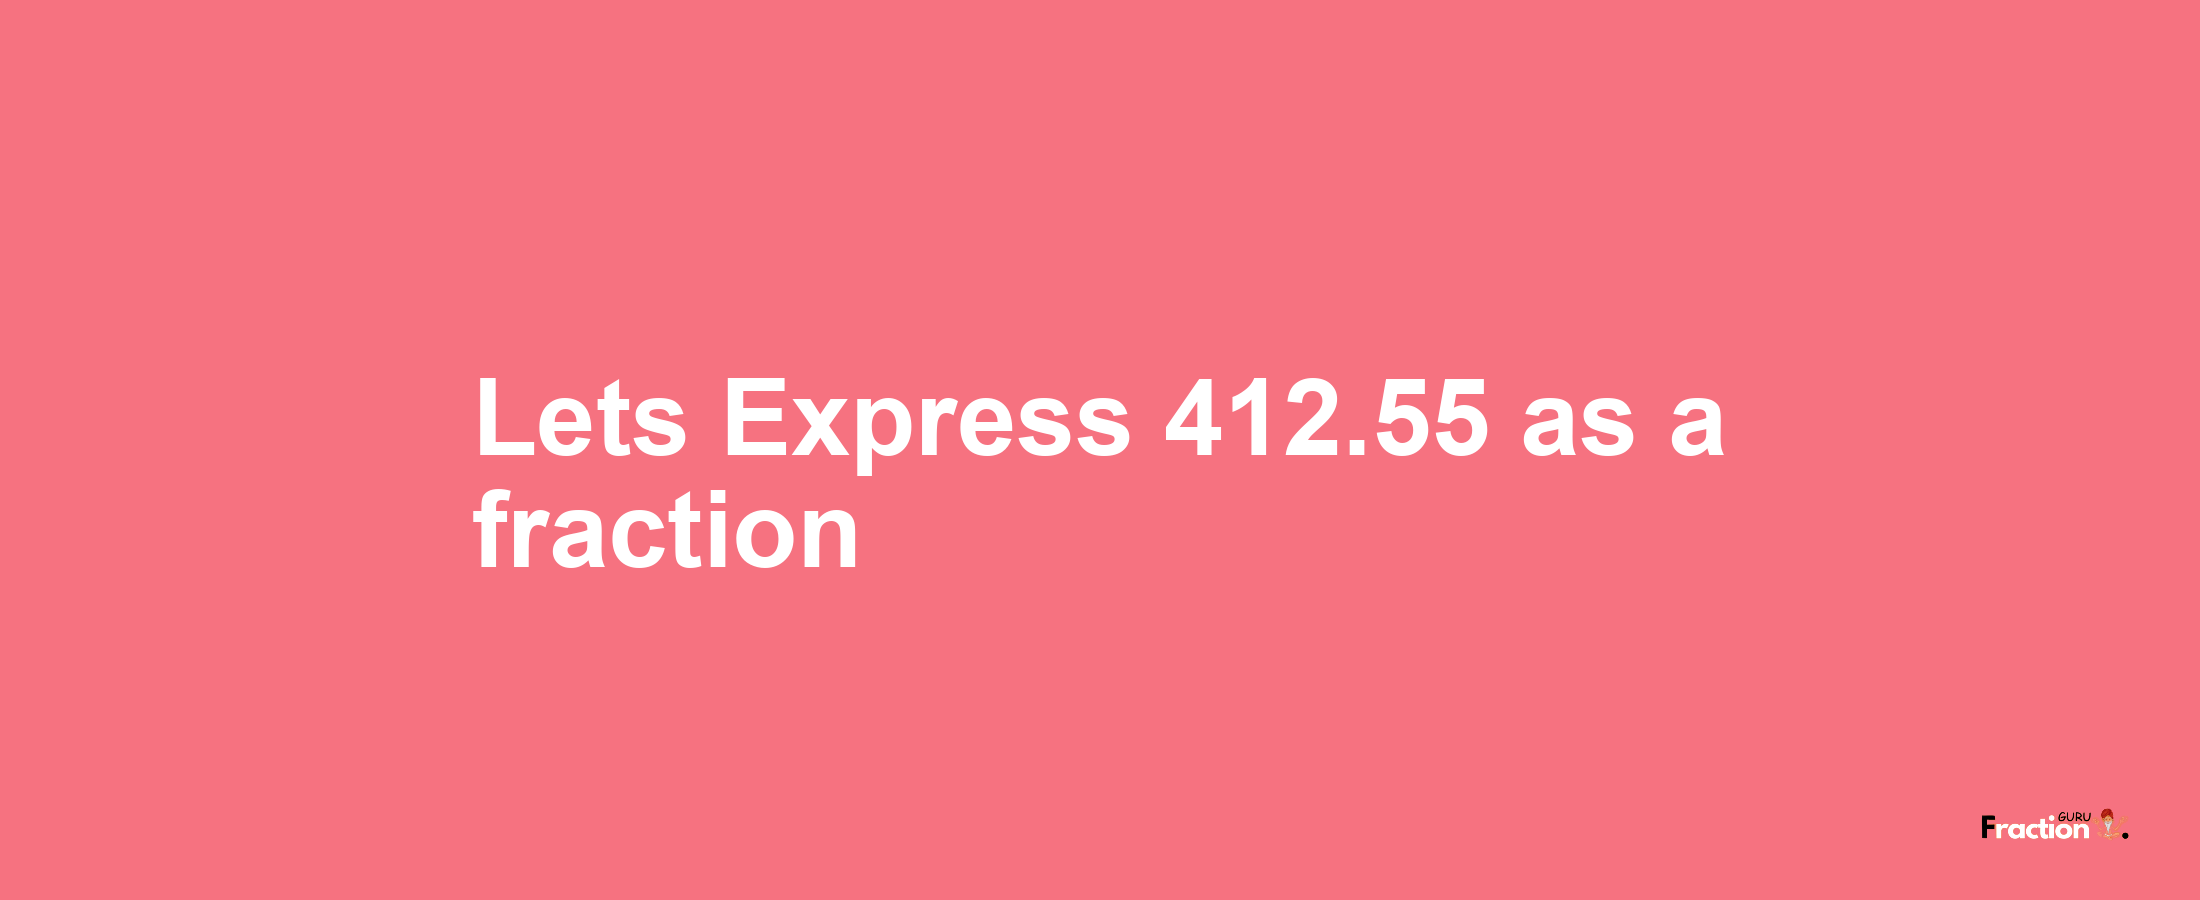 Lets Express 412.55 as afraction